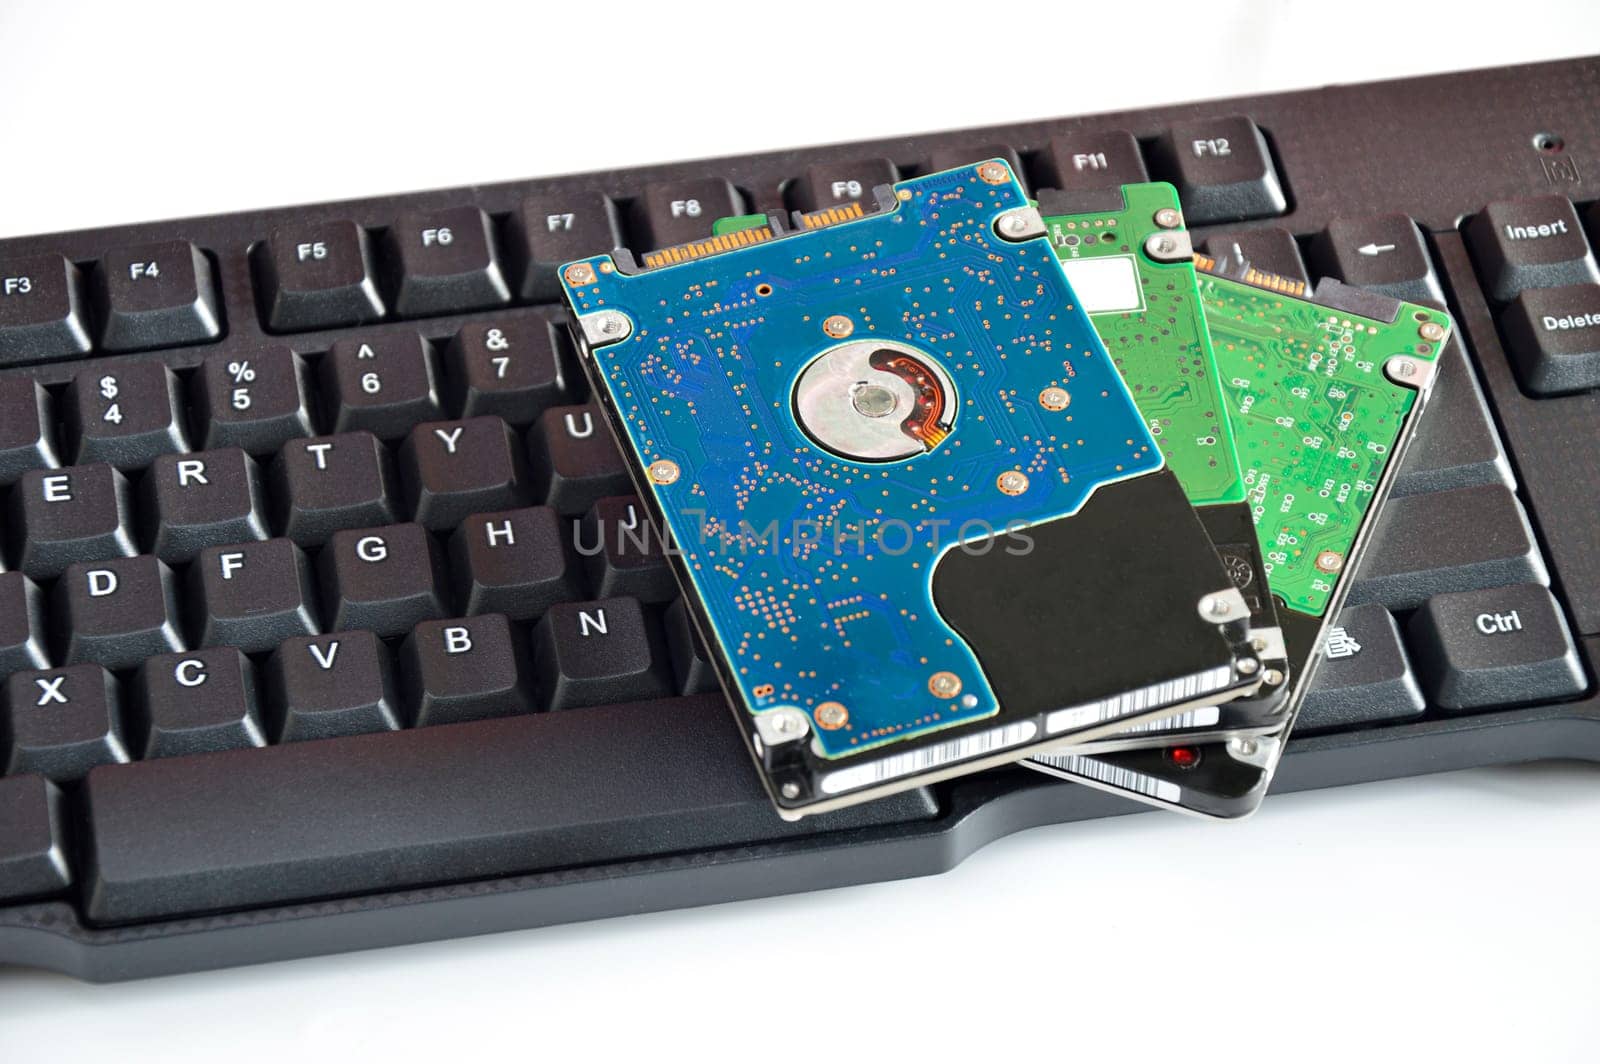 2.5 inch hard drive, rotating plate, placed on the keyboard